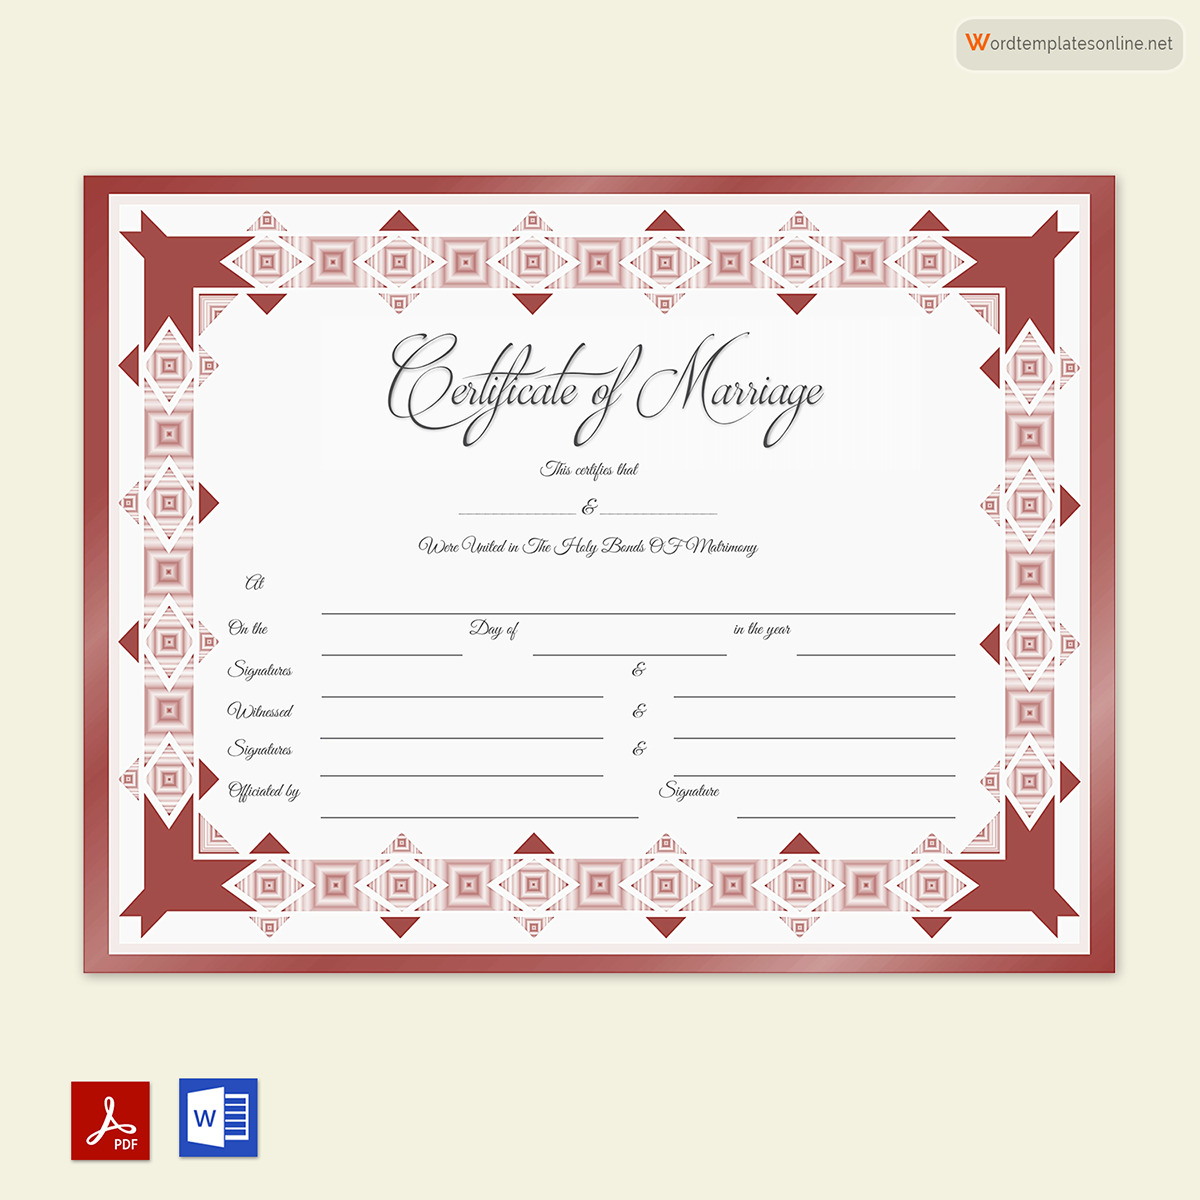 Marriage Certificate formt in word